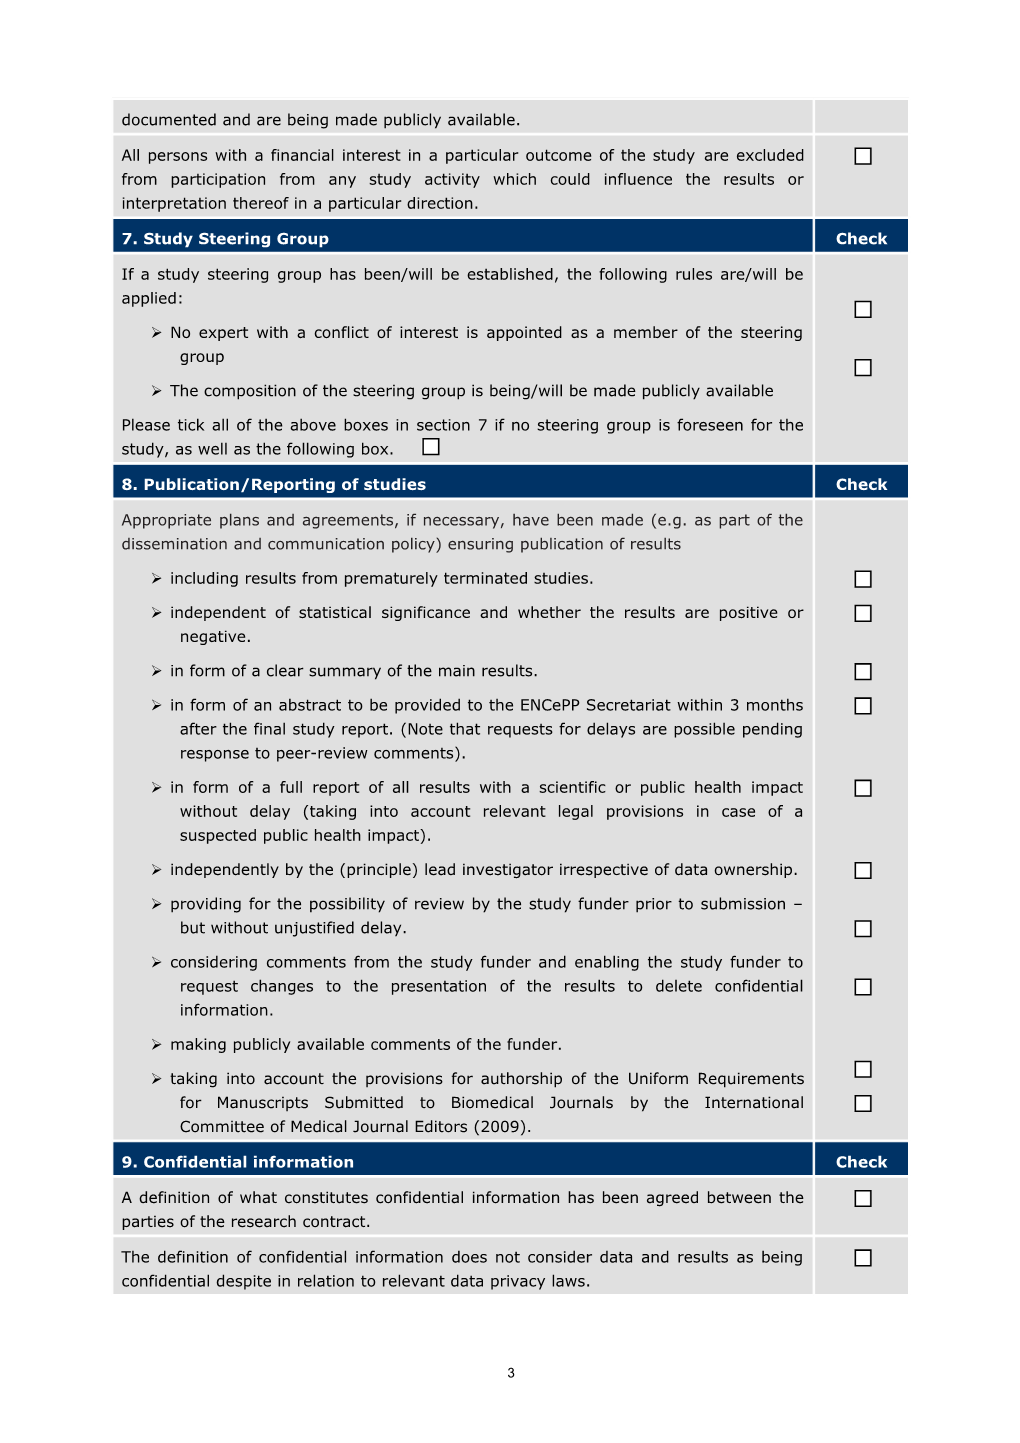 Checklist of the Encepp Code of Conduct for Encepp Studies